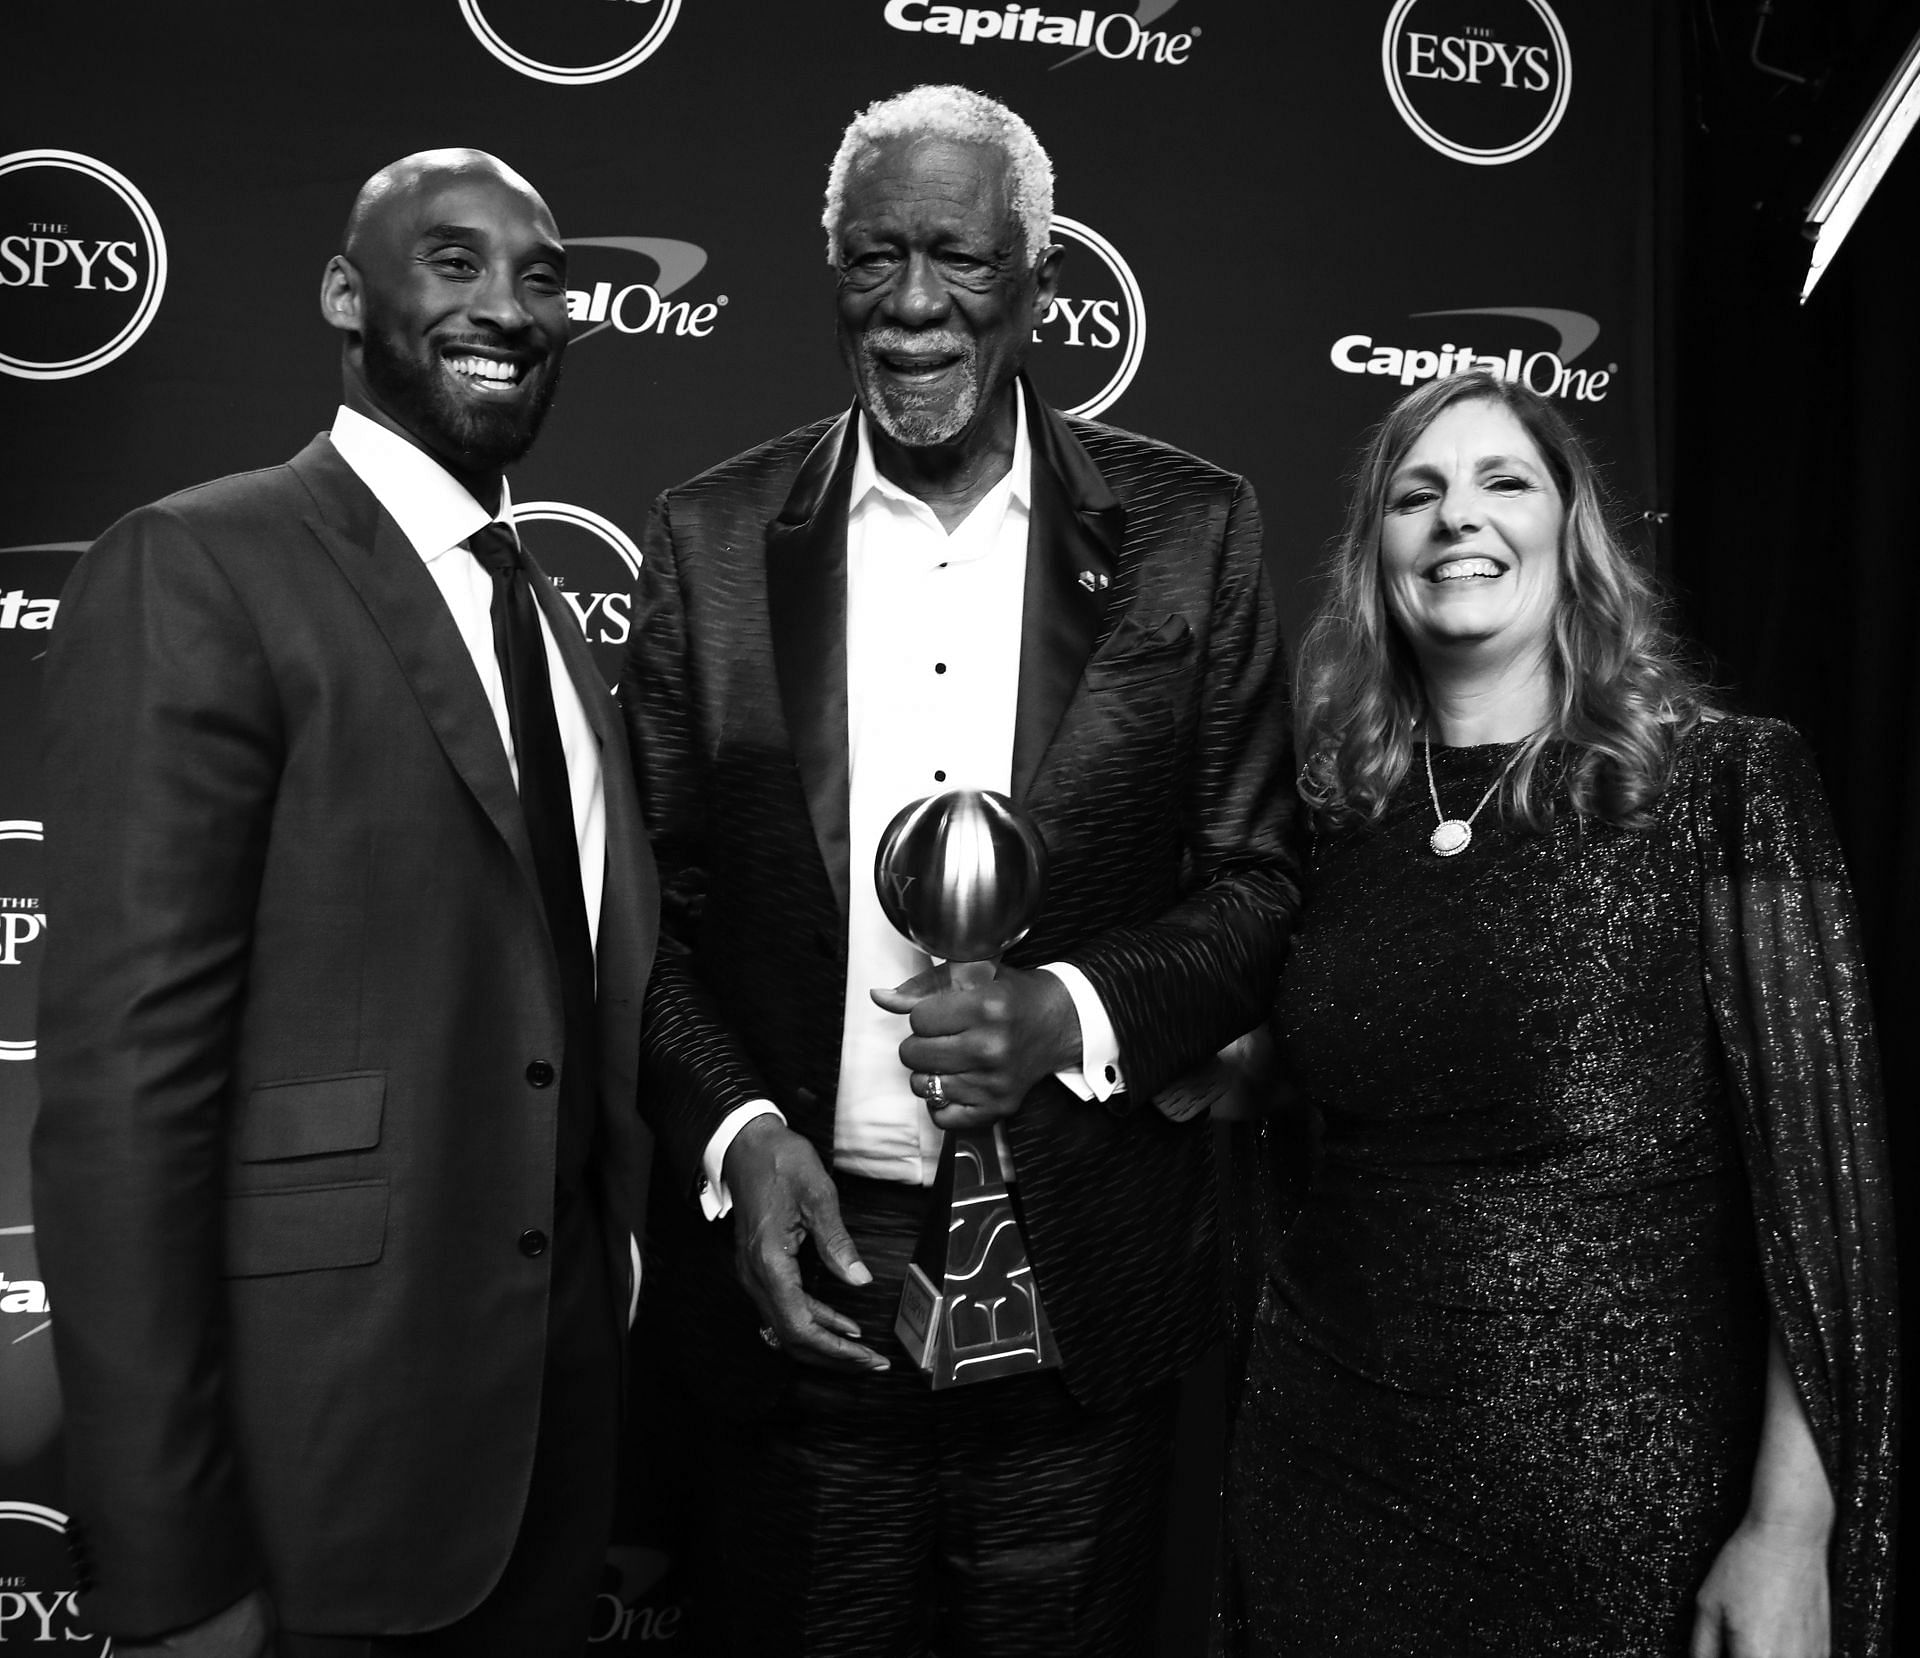 NBA permanently retires Bill Russell's No. 6 - The Washington Post